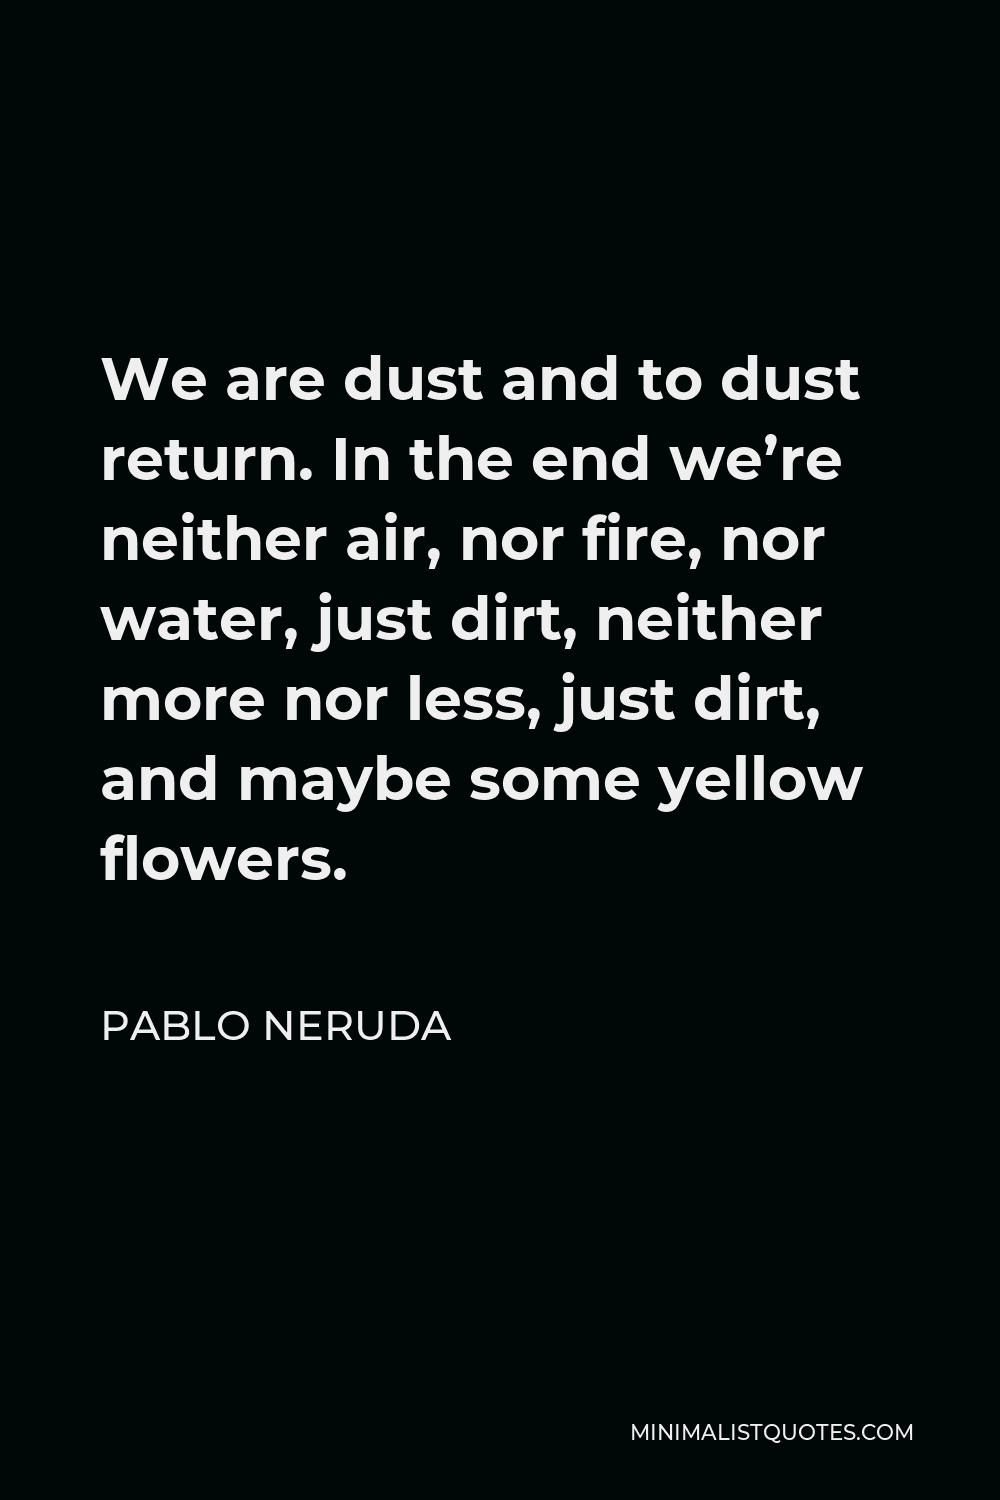 Pablo Neruda Quote - We are dust and to dust return. In the end we’re neither air, nor fire, nor water, just dirt, neither more nor less, just dirt, and maybe some yellow flowers.